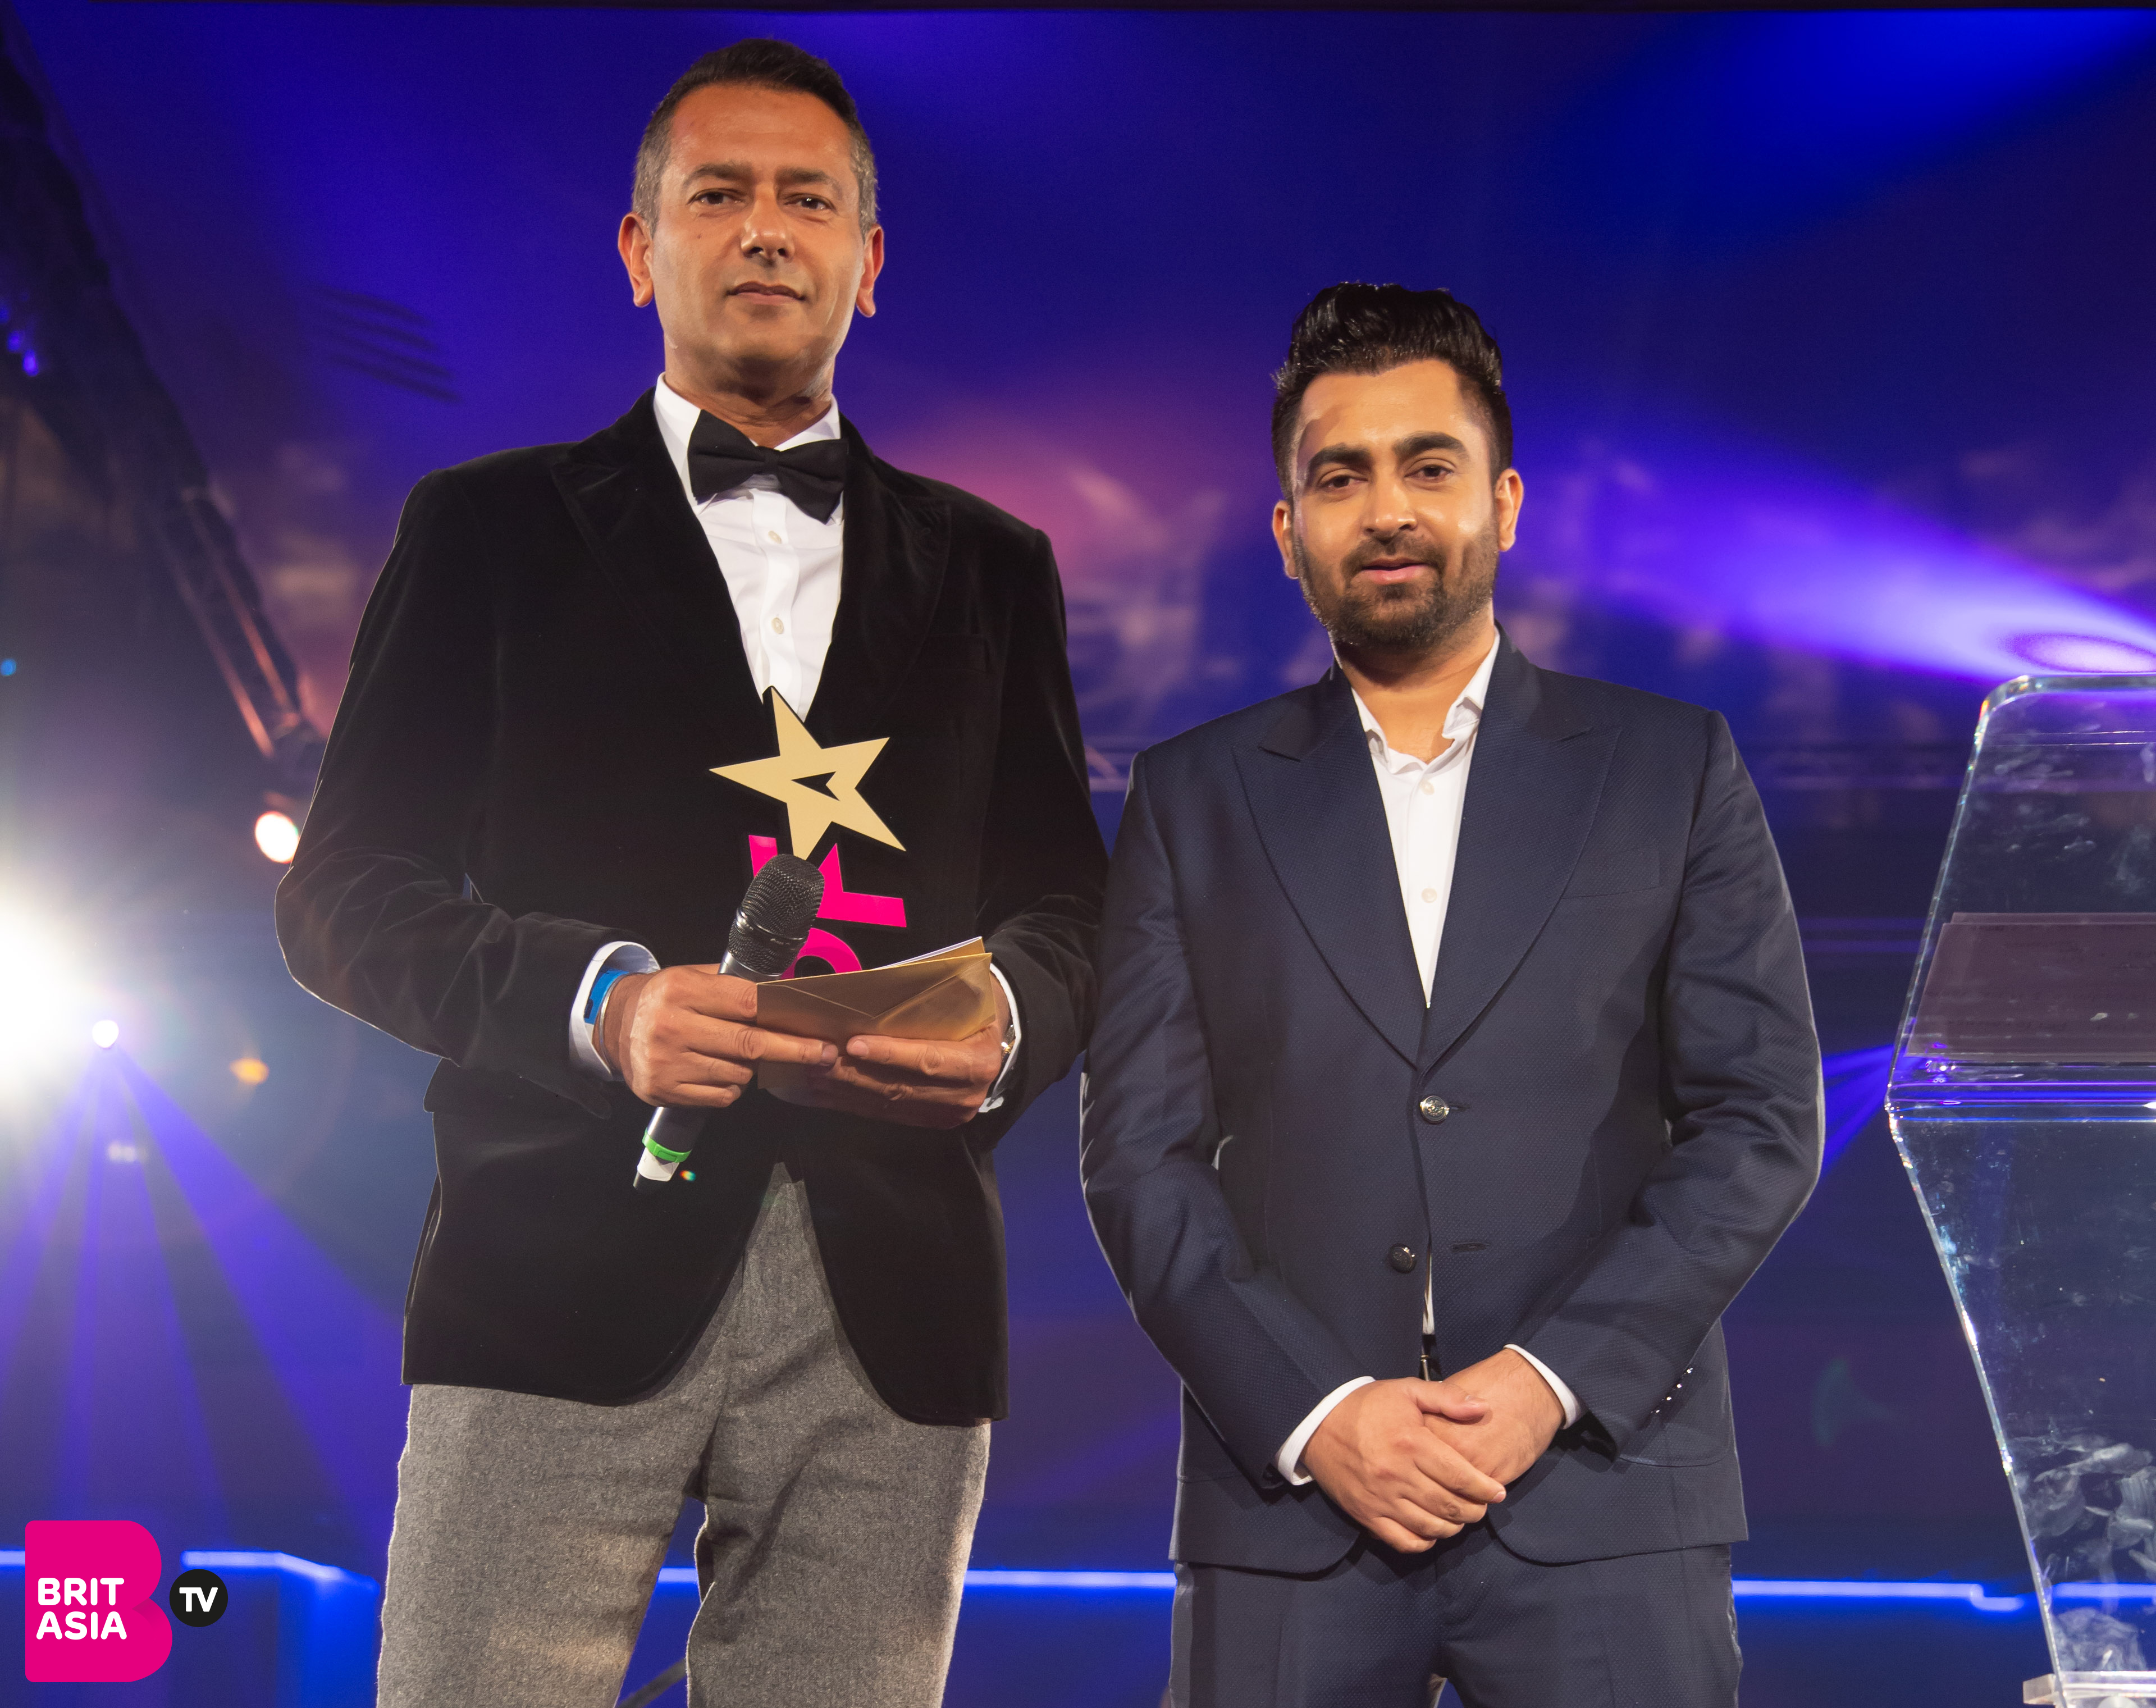 Sharry Mann and Sponser Kaspa's present the award for Best Supporting Actress